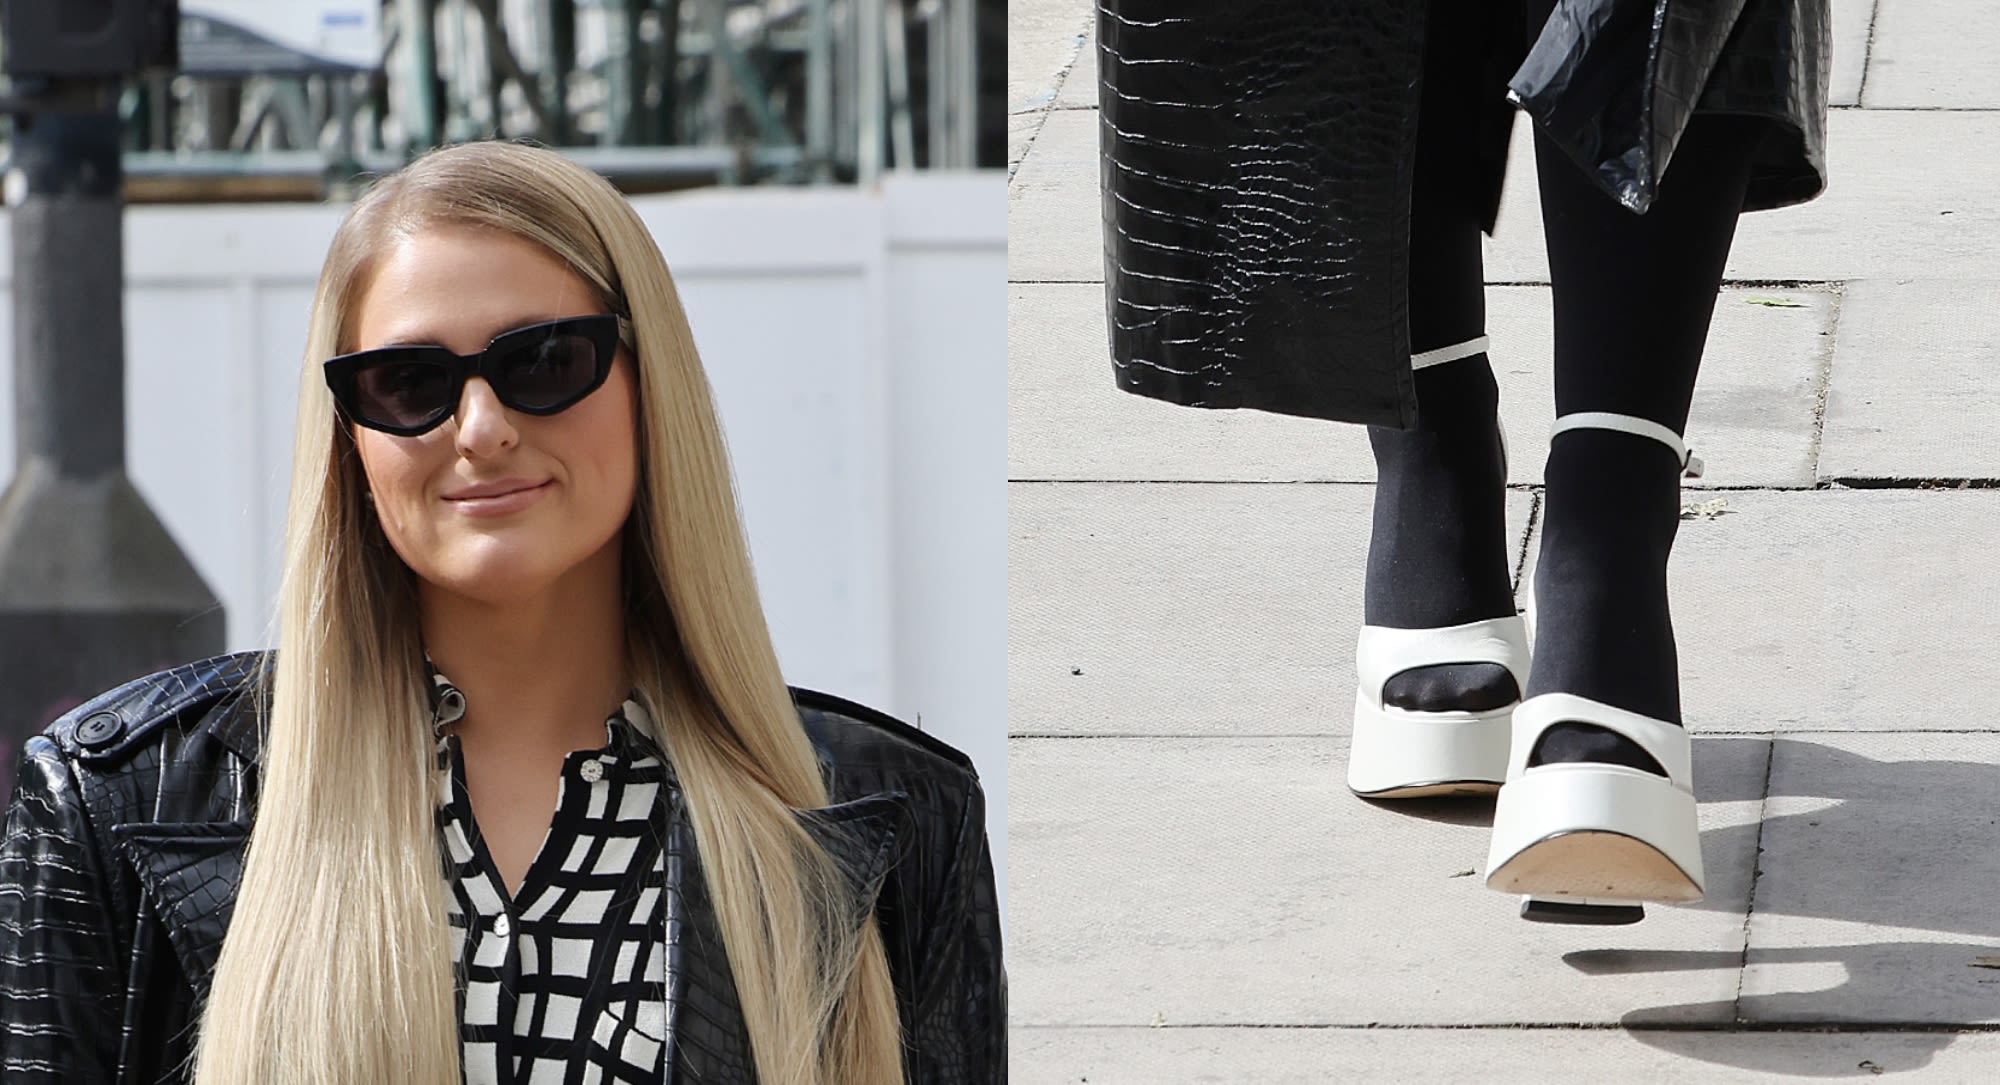 Meghan Trainor Goes Sky-High in White Platform Sandals for Kiss Radio Appearance in London